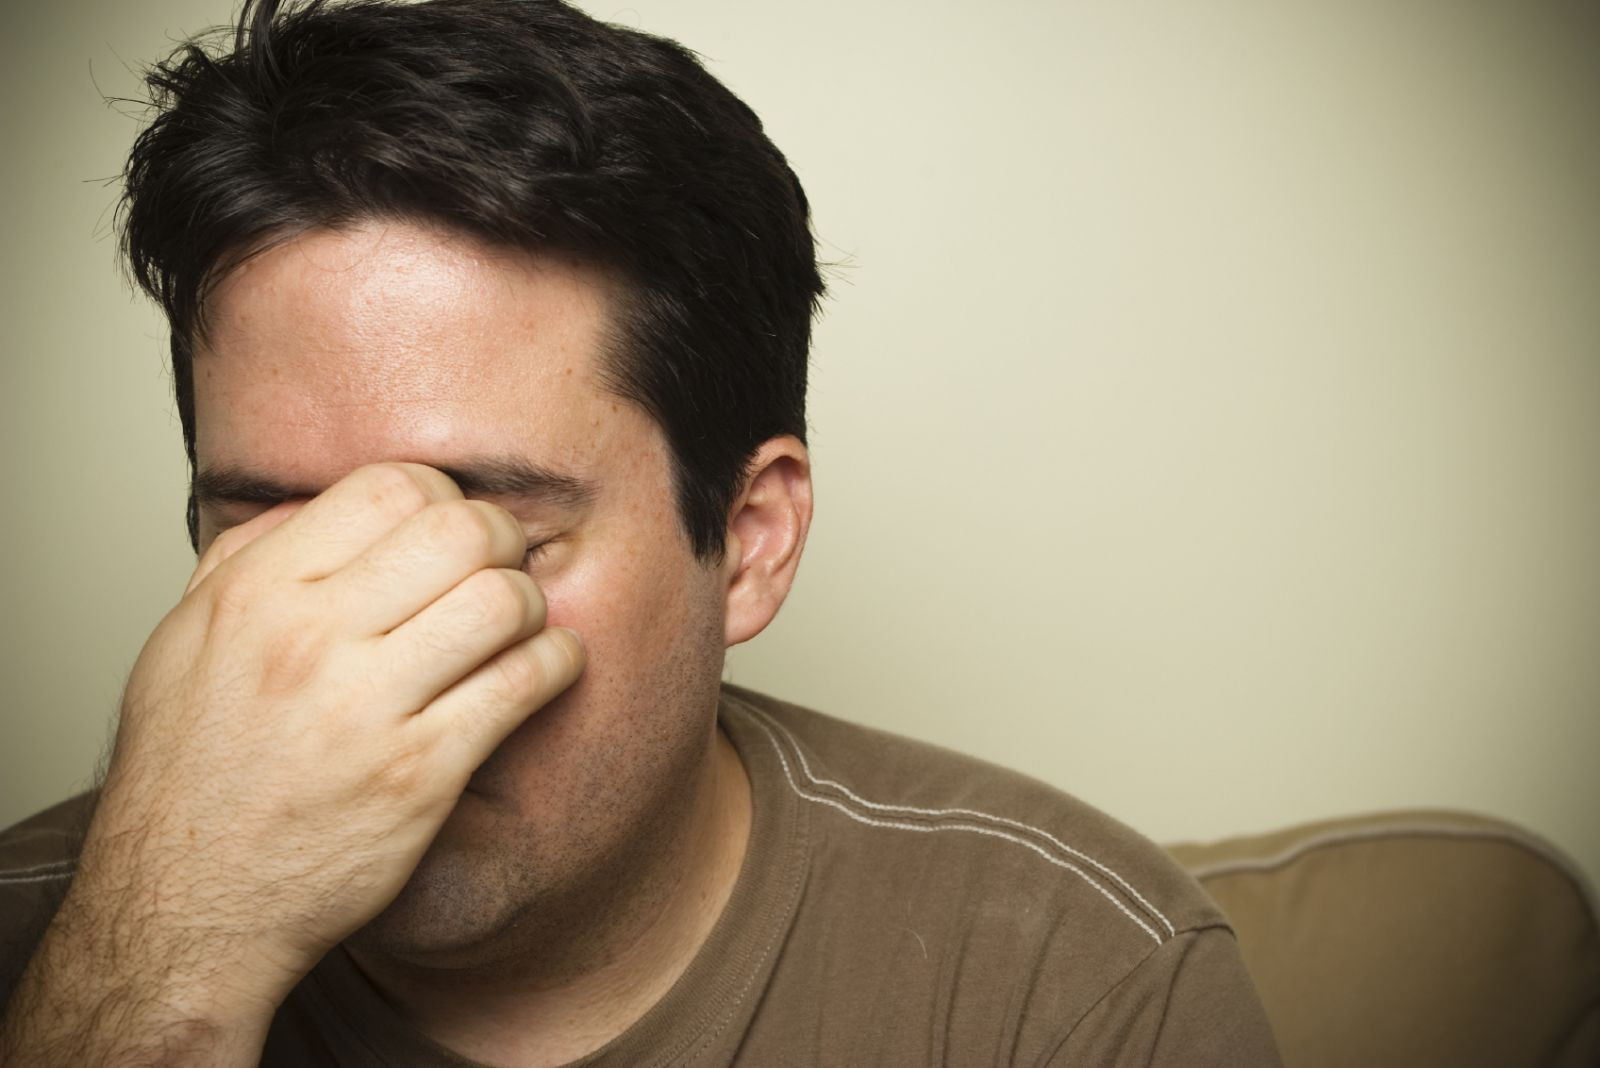 Man holds his nose because of sinus pain or headache.